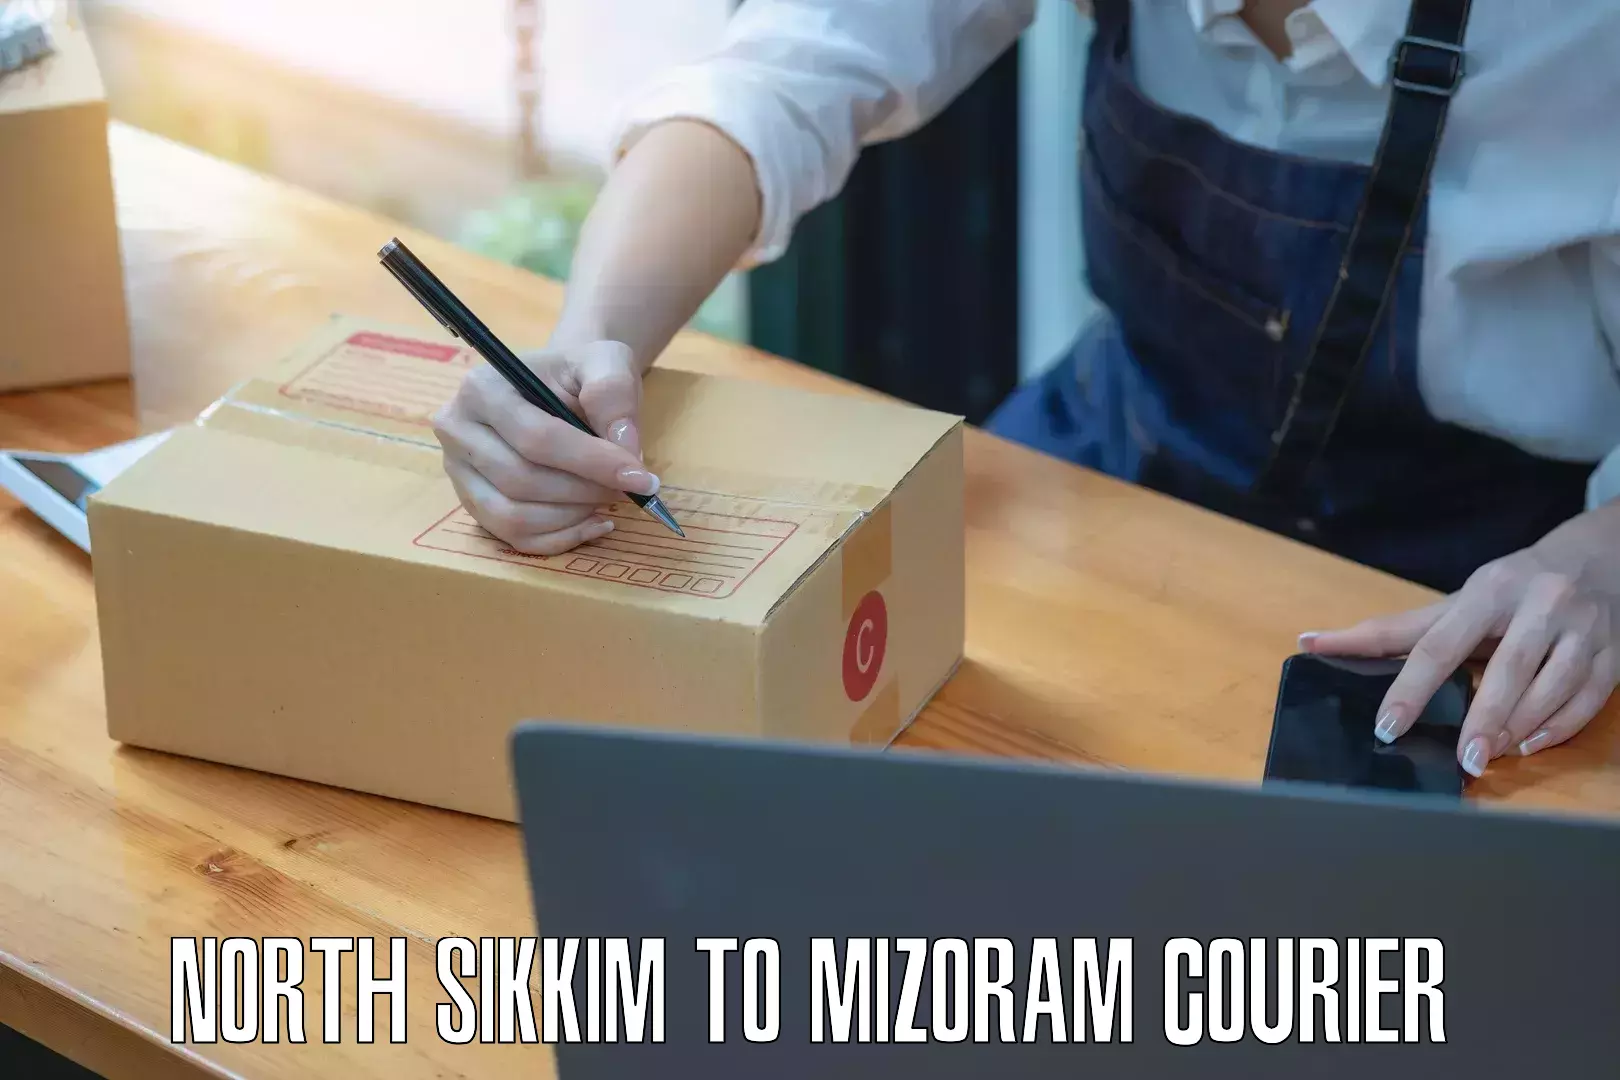 Express courier capabilities in North Sikkim to Mizoram